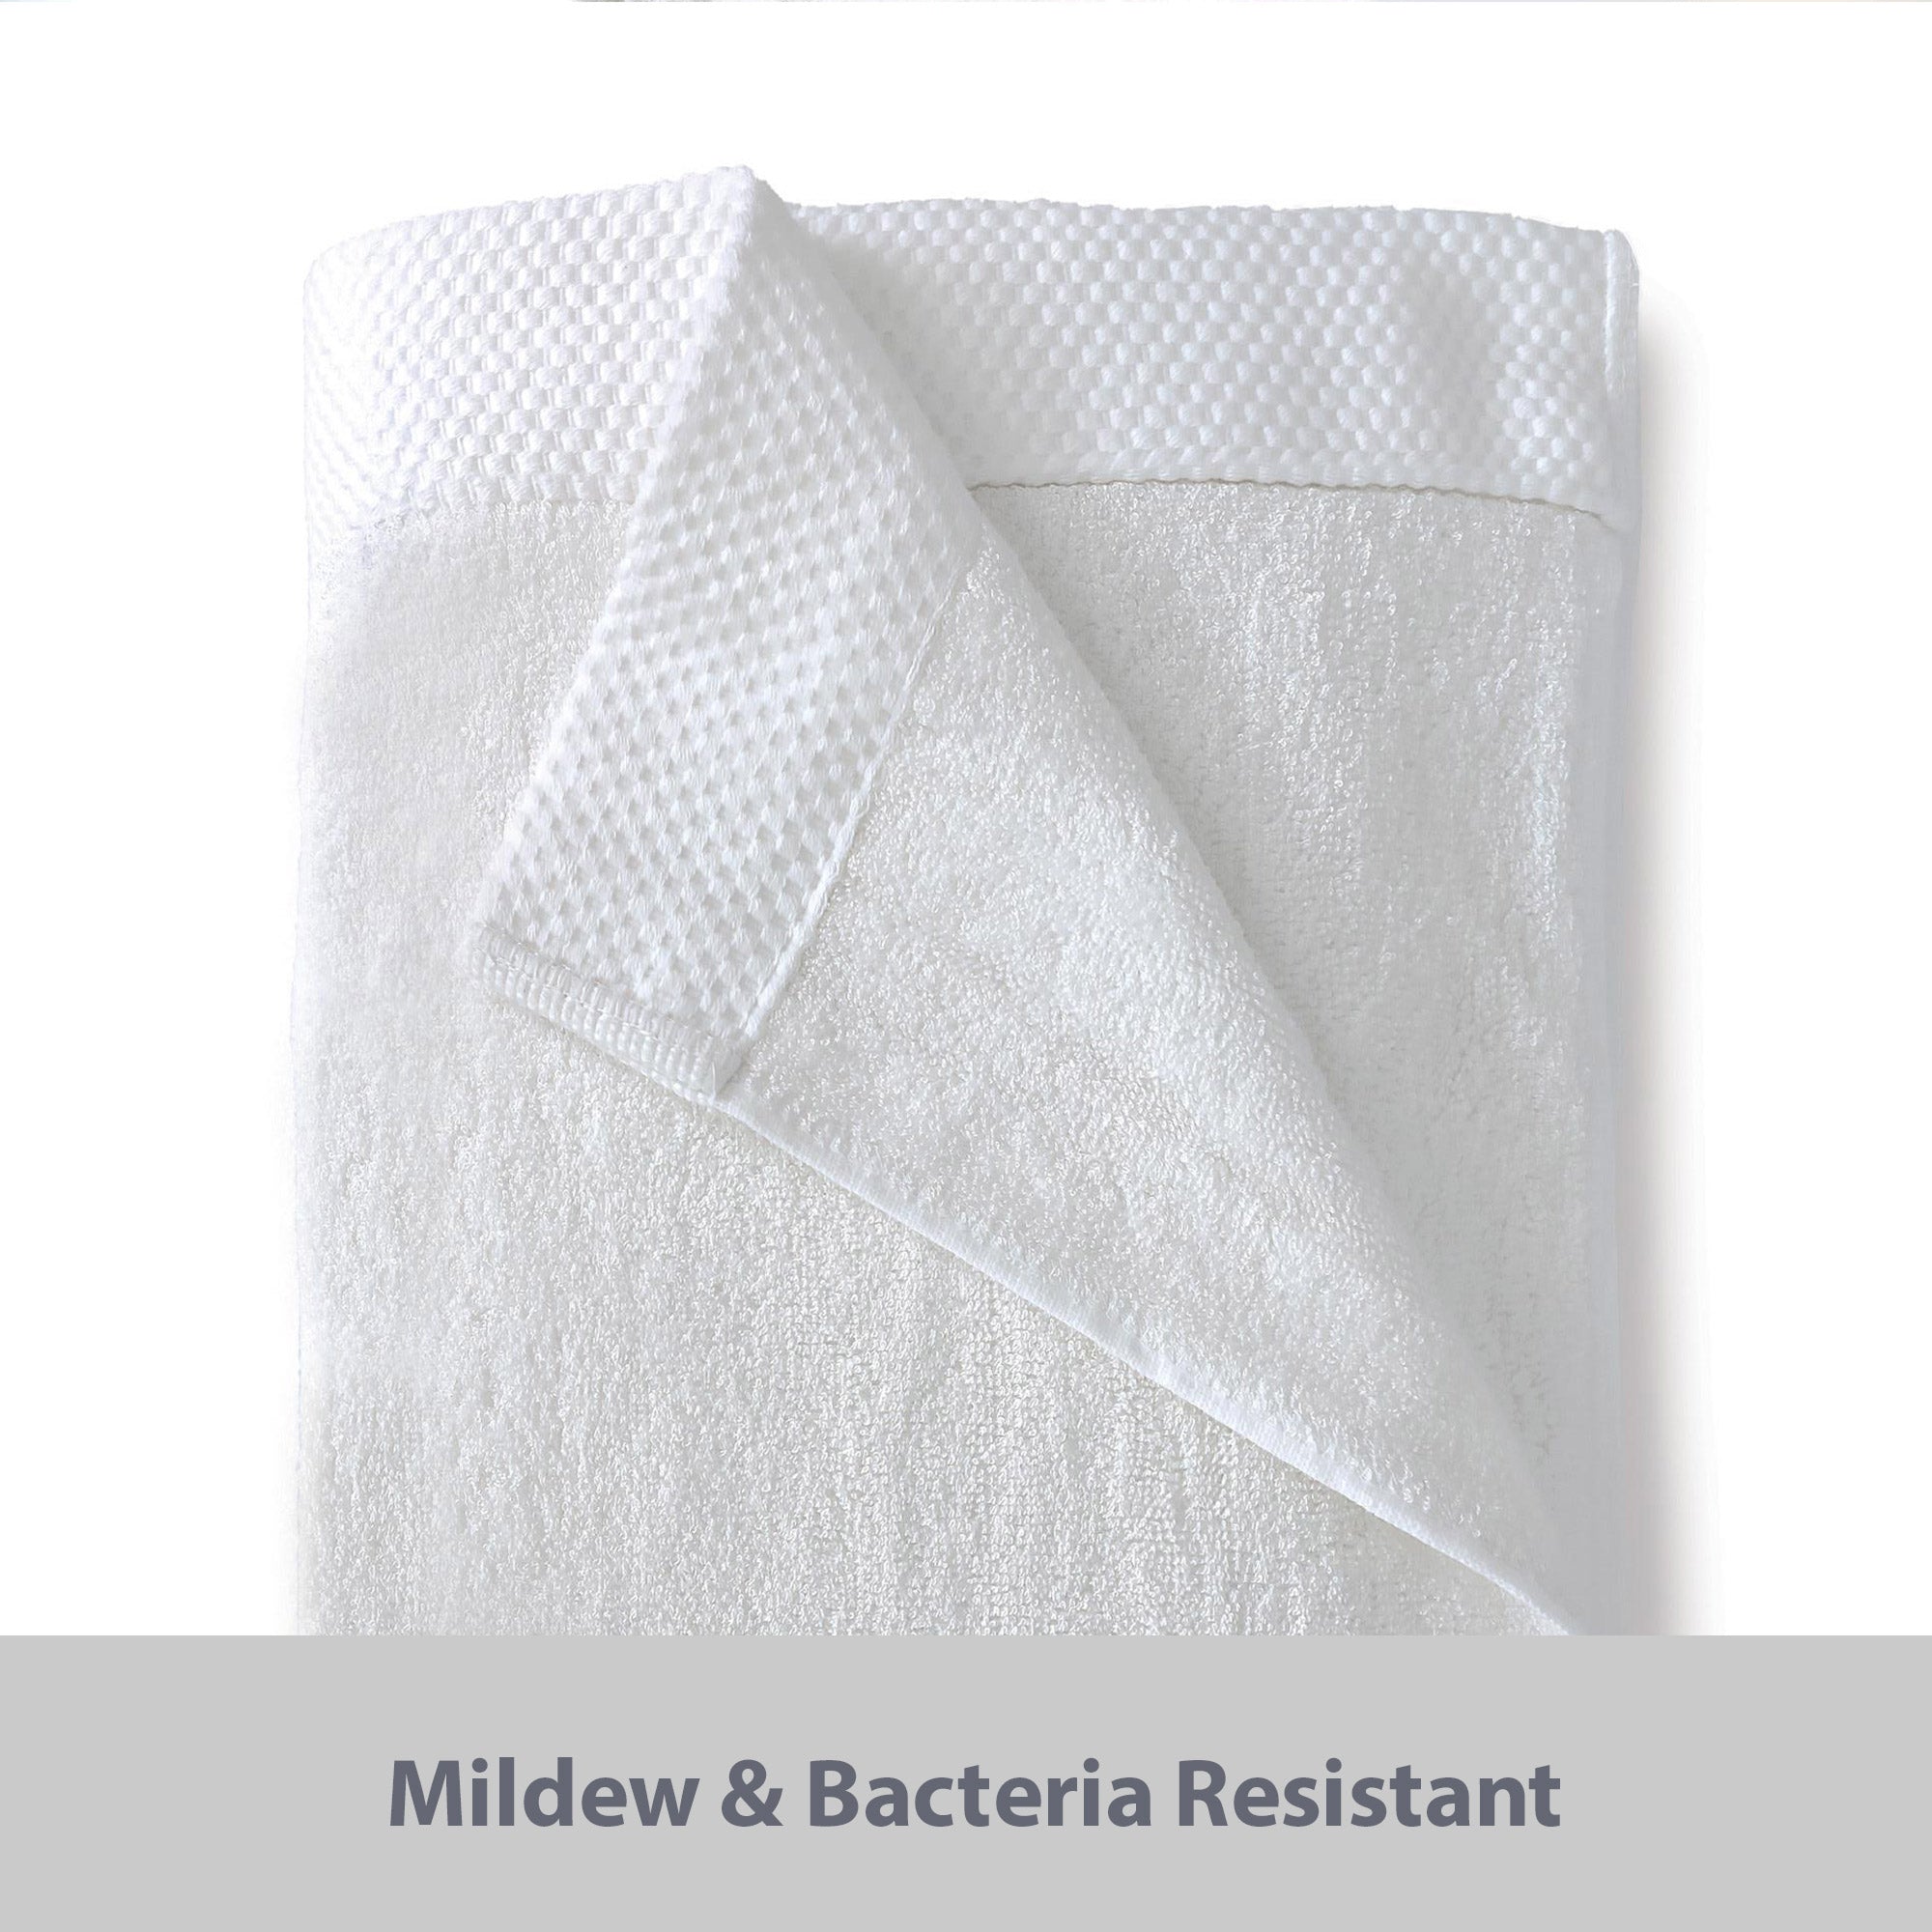 white bamboo folded towel showing mildew resistant